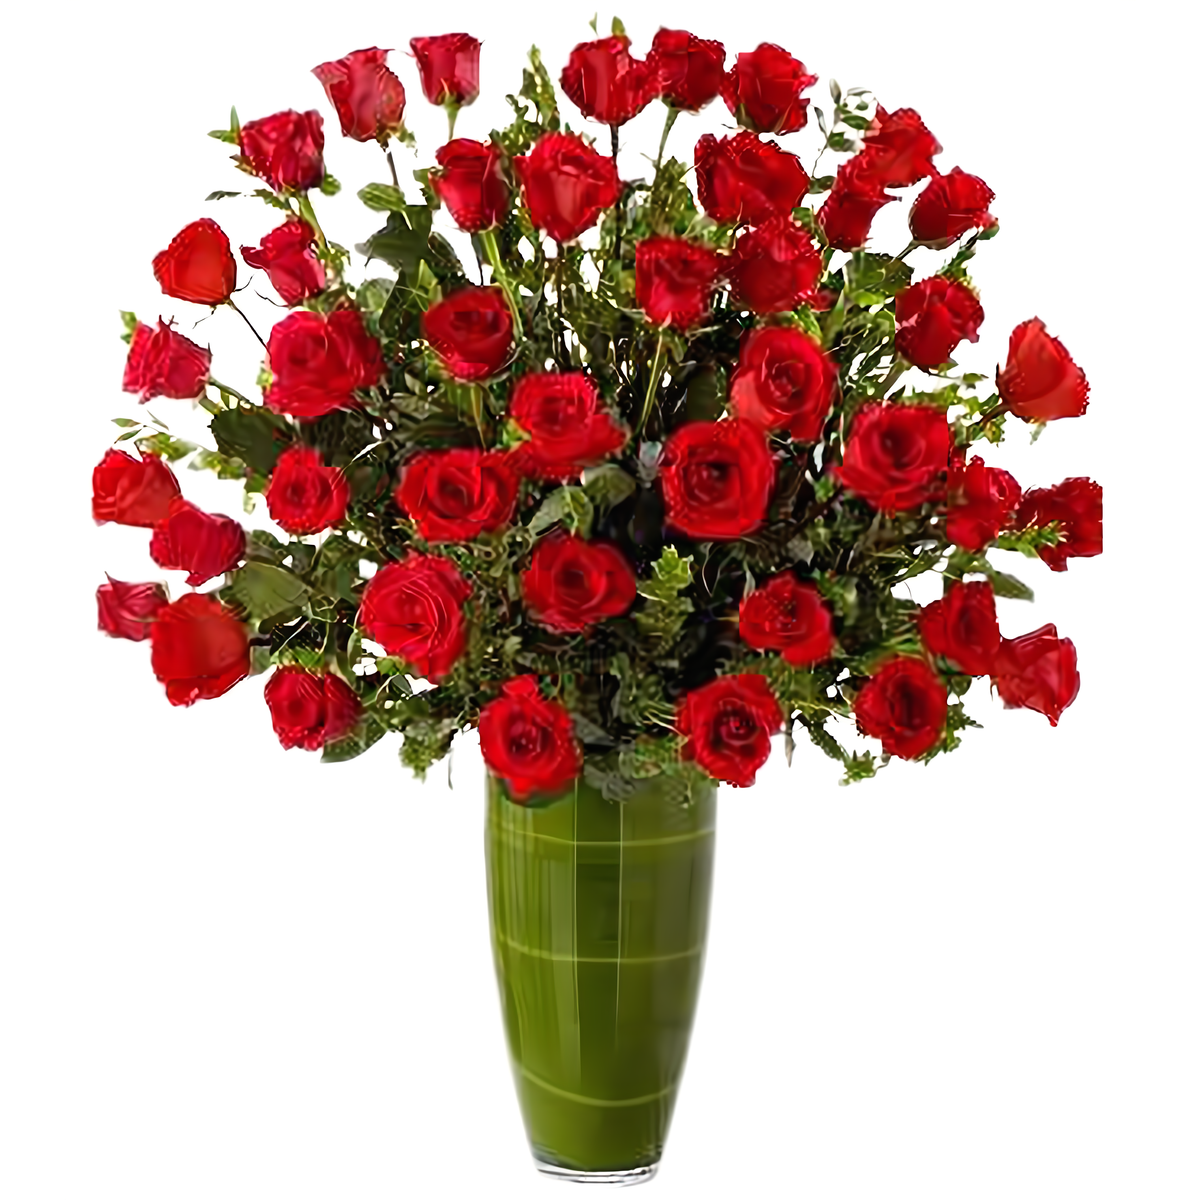 Luxury Rose Bouquet - 24 Premium Red Long-Stemmed Roses - Products &gt; Luxury Collection